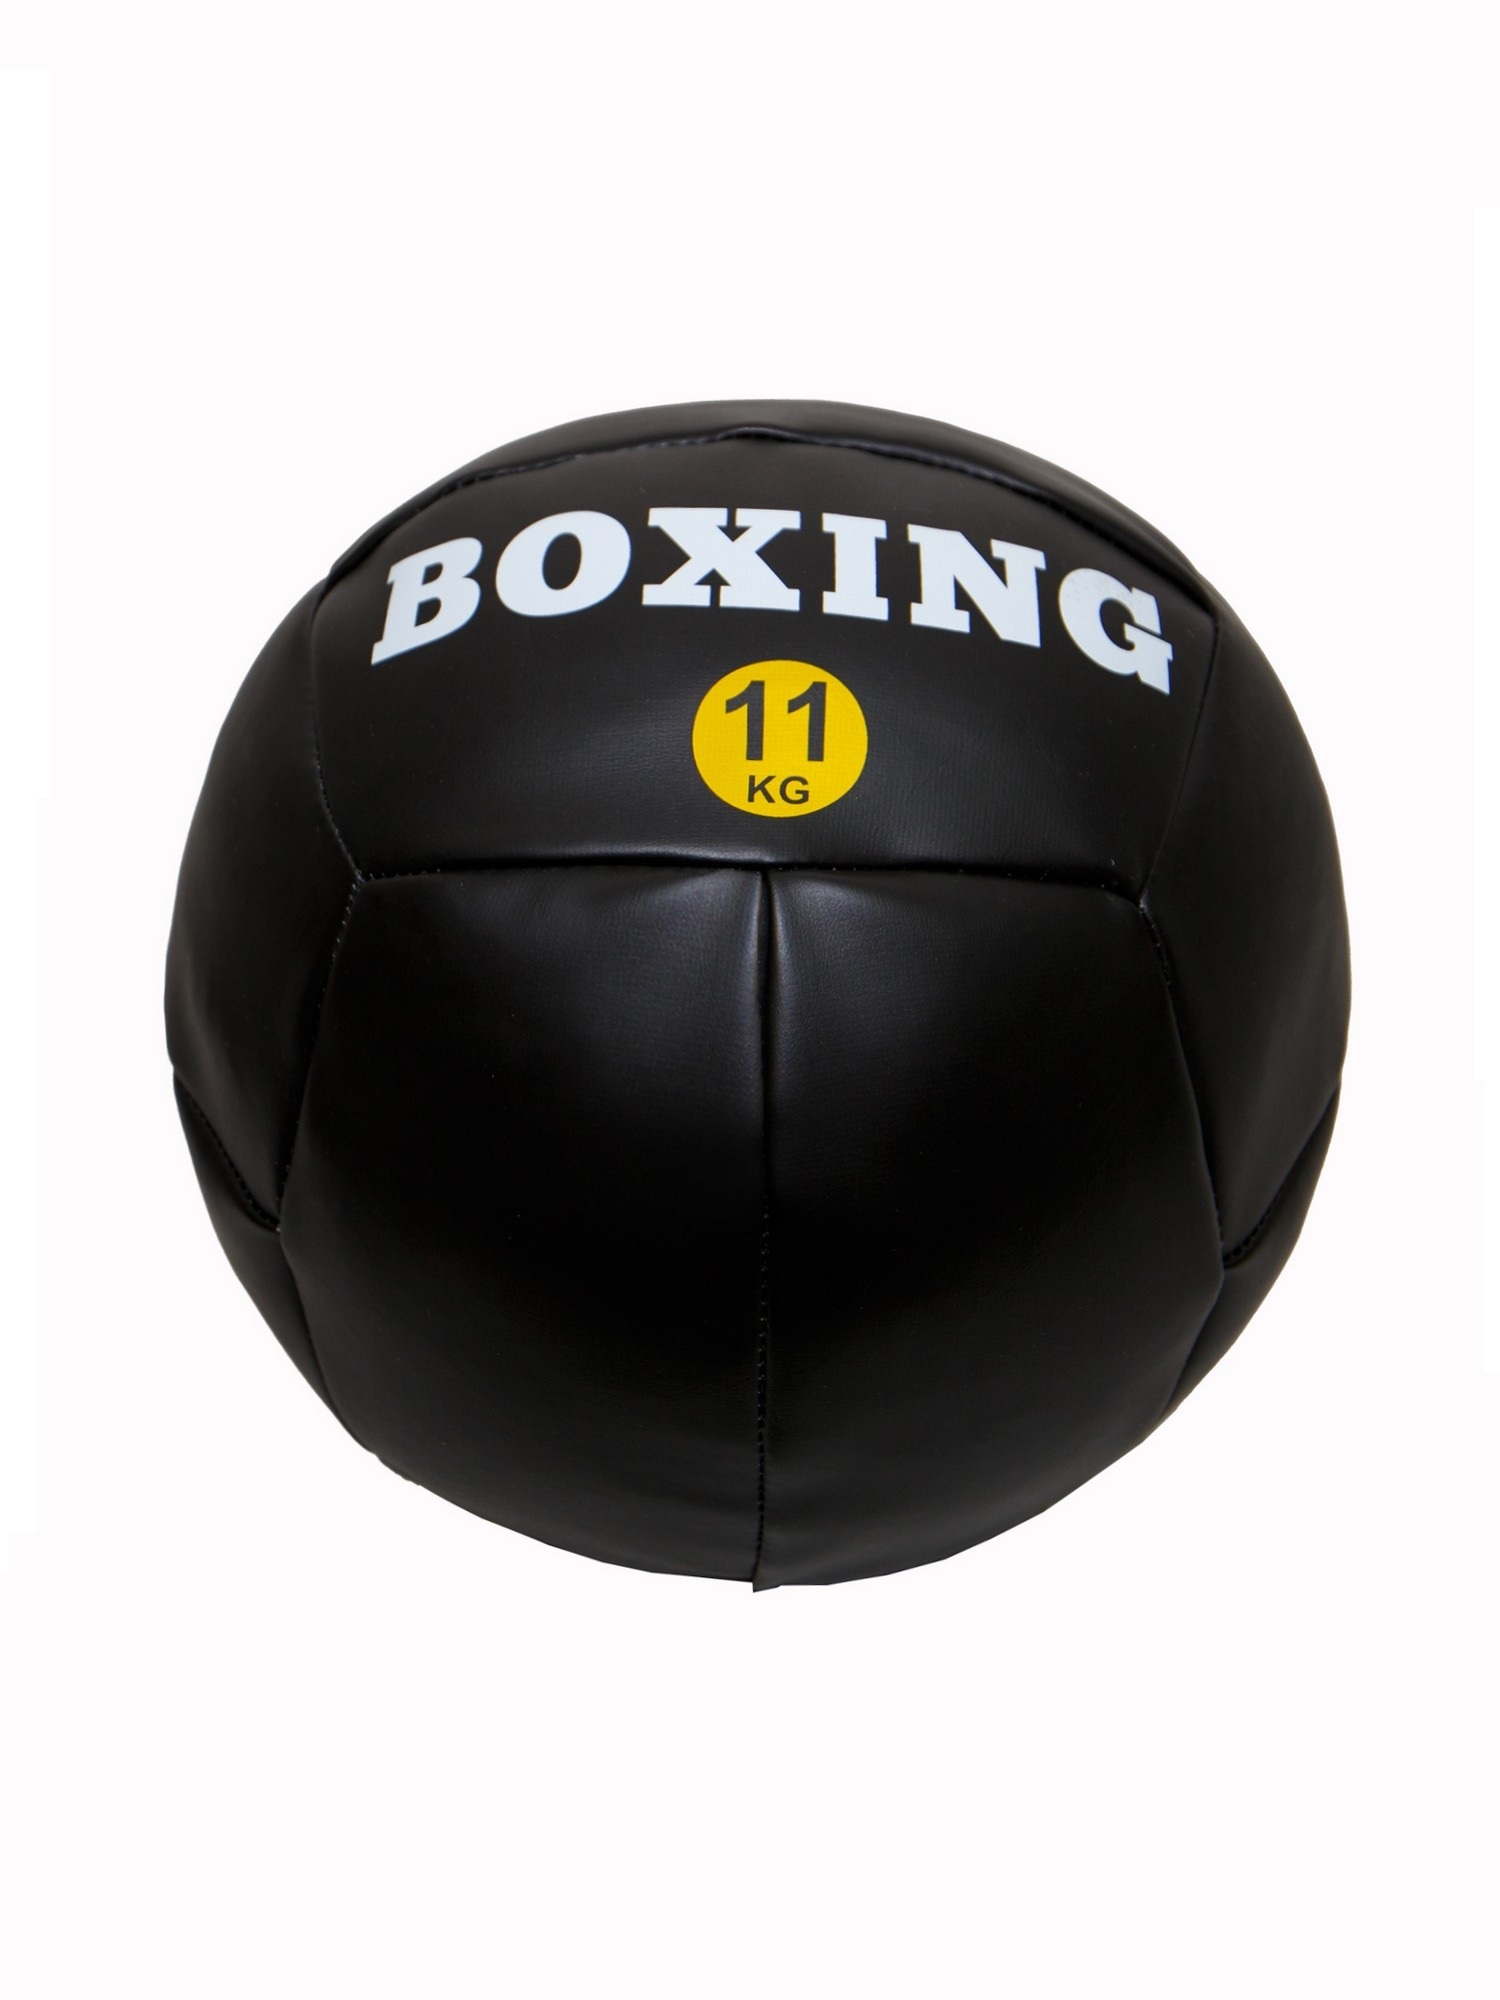 Медицинбол 11кг Totalbox Boxing МДИБ-11 1500_2000